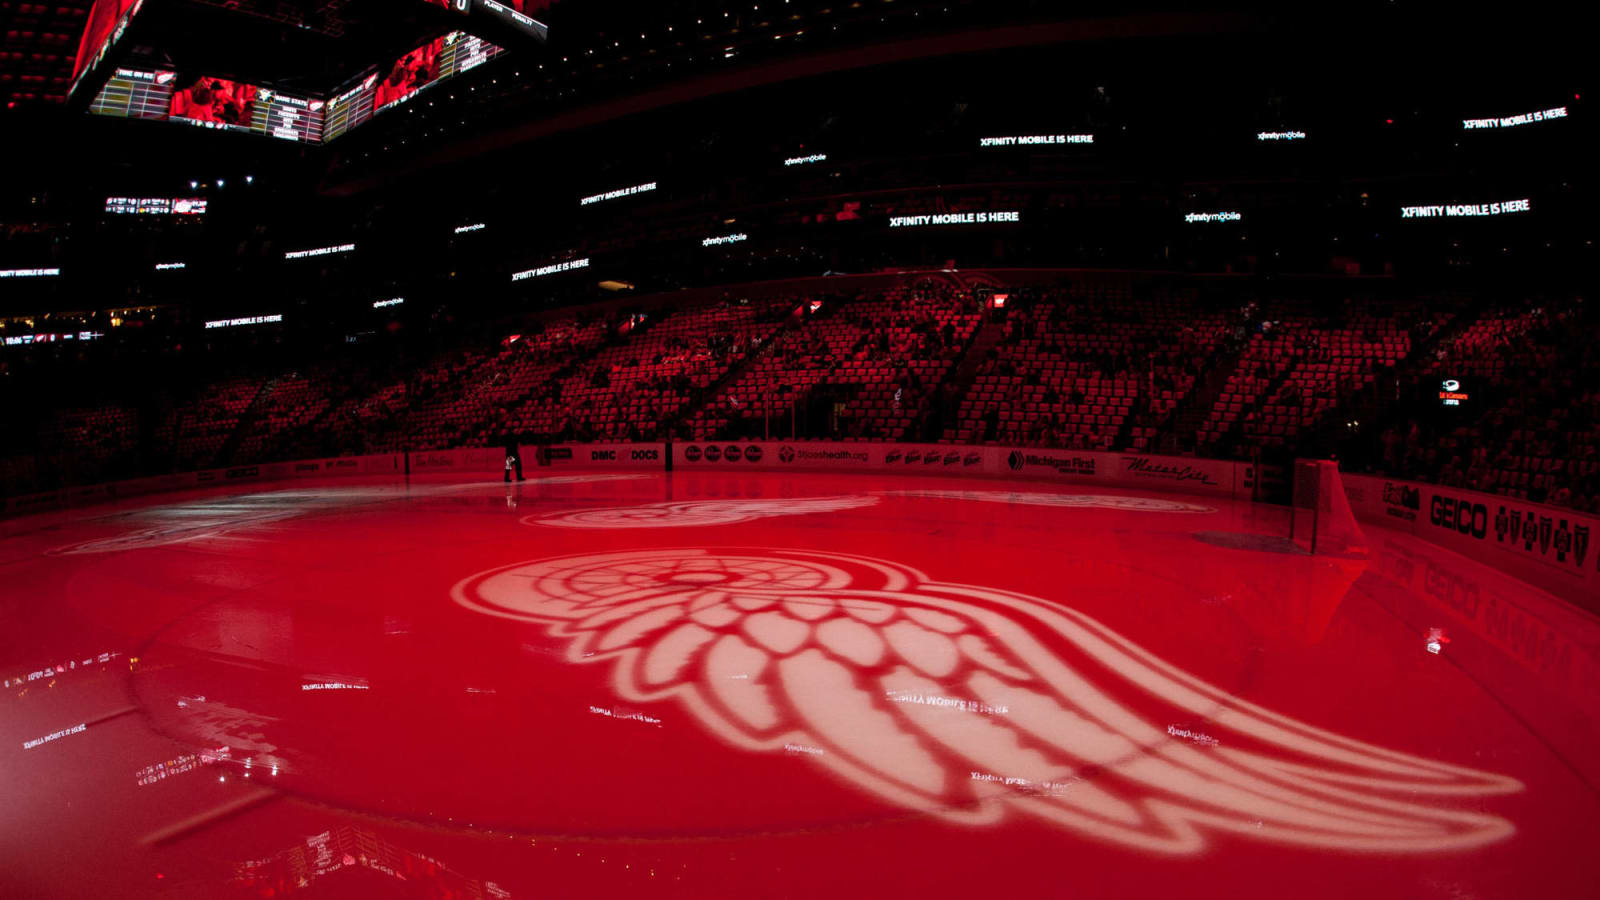 Red Wings game against Colorado on December 20 postponed due to COVID-19